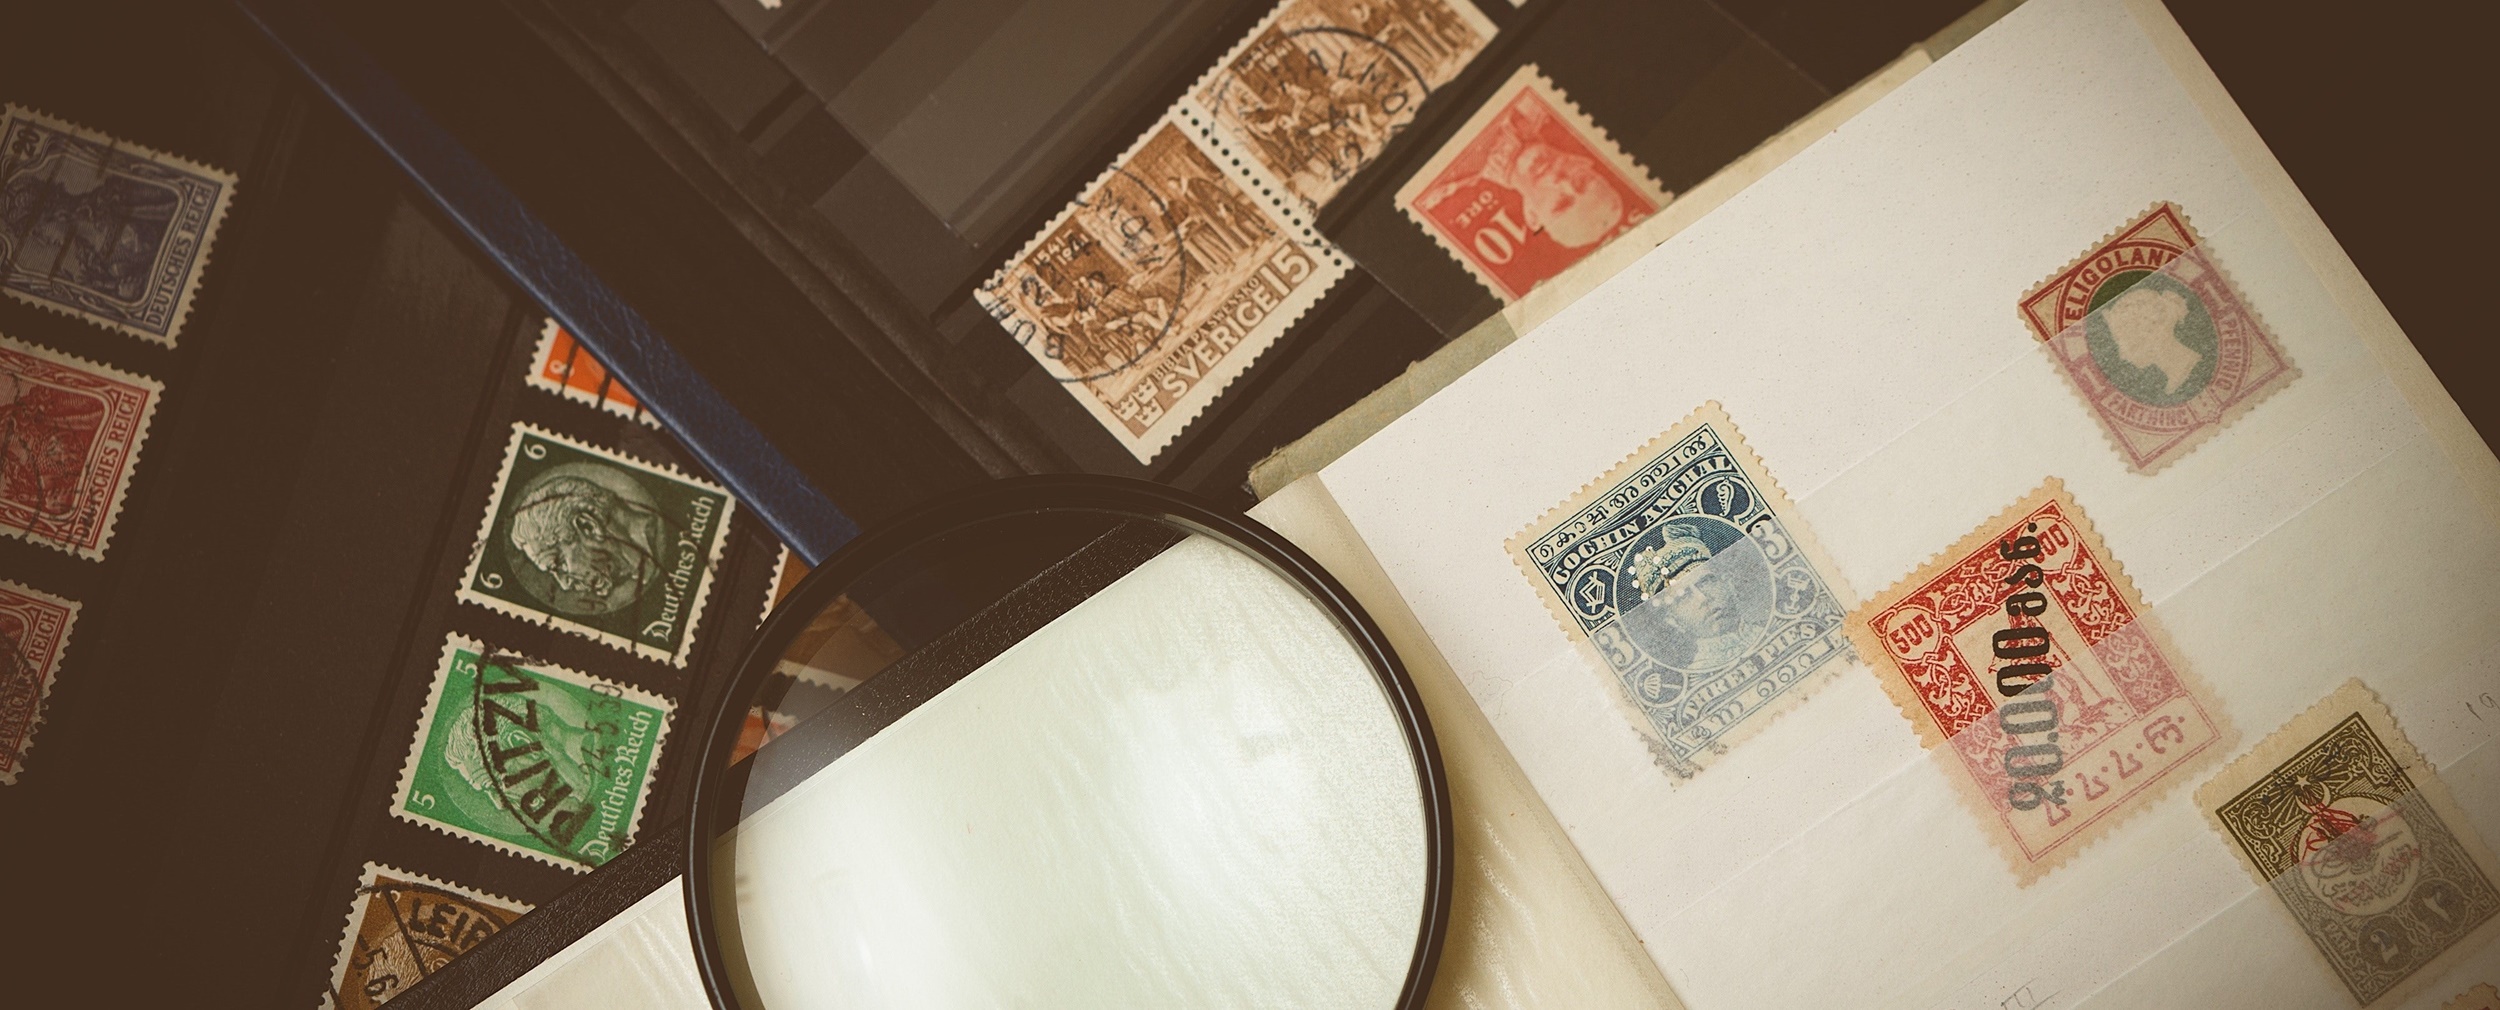 Stamps stamp valuations